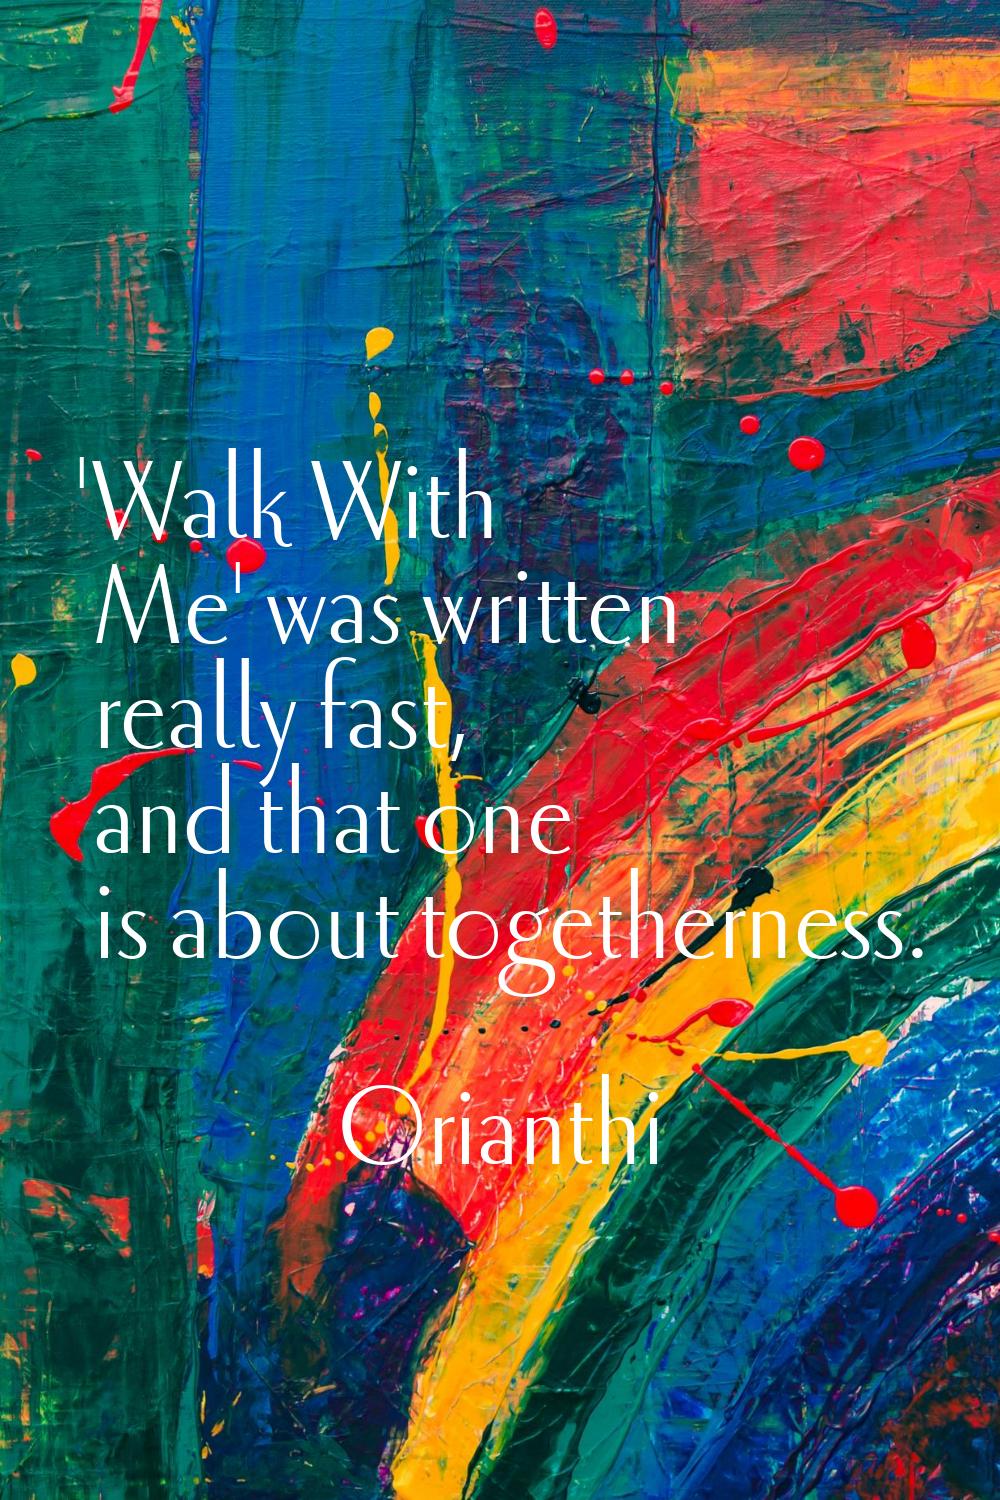 'Walk With Me' was written really fast, and that one is about togetherness.